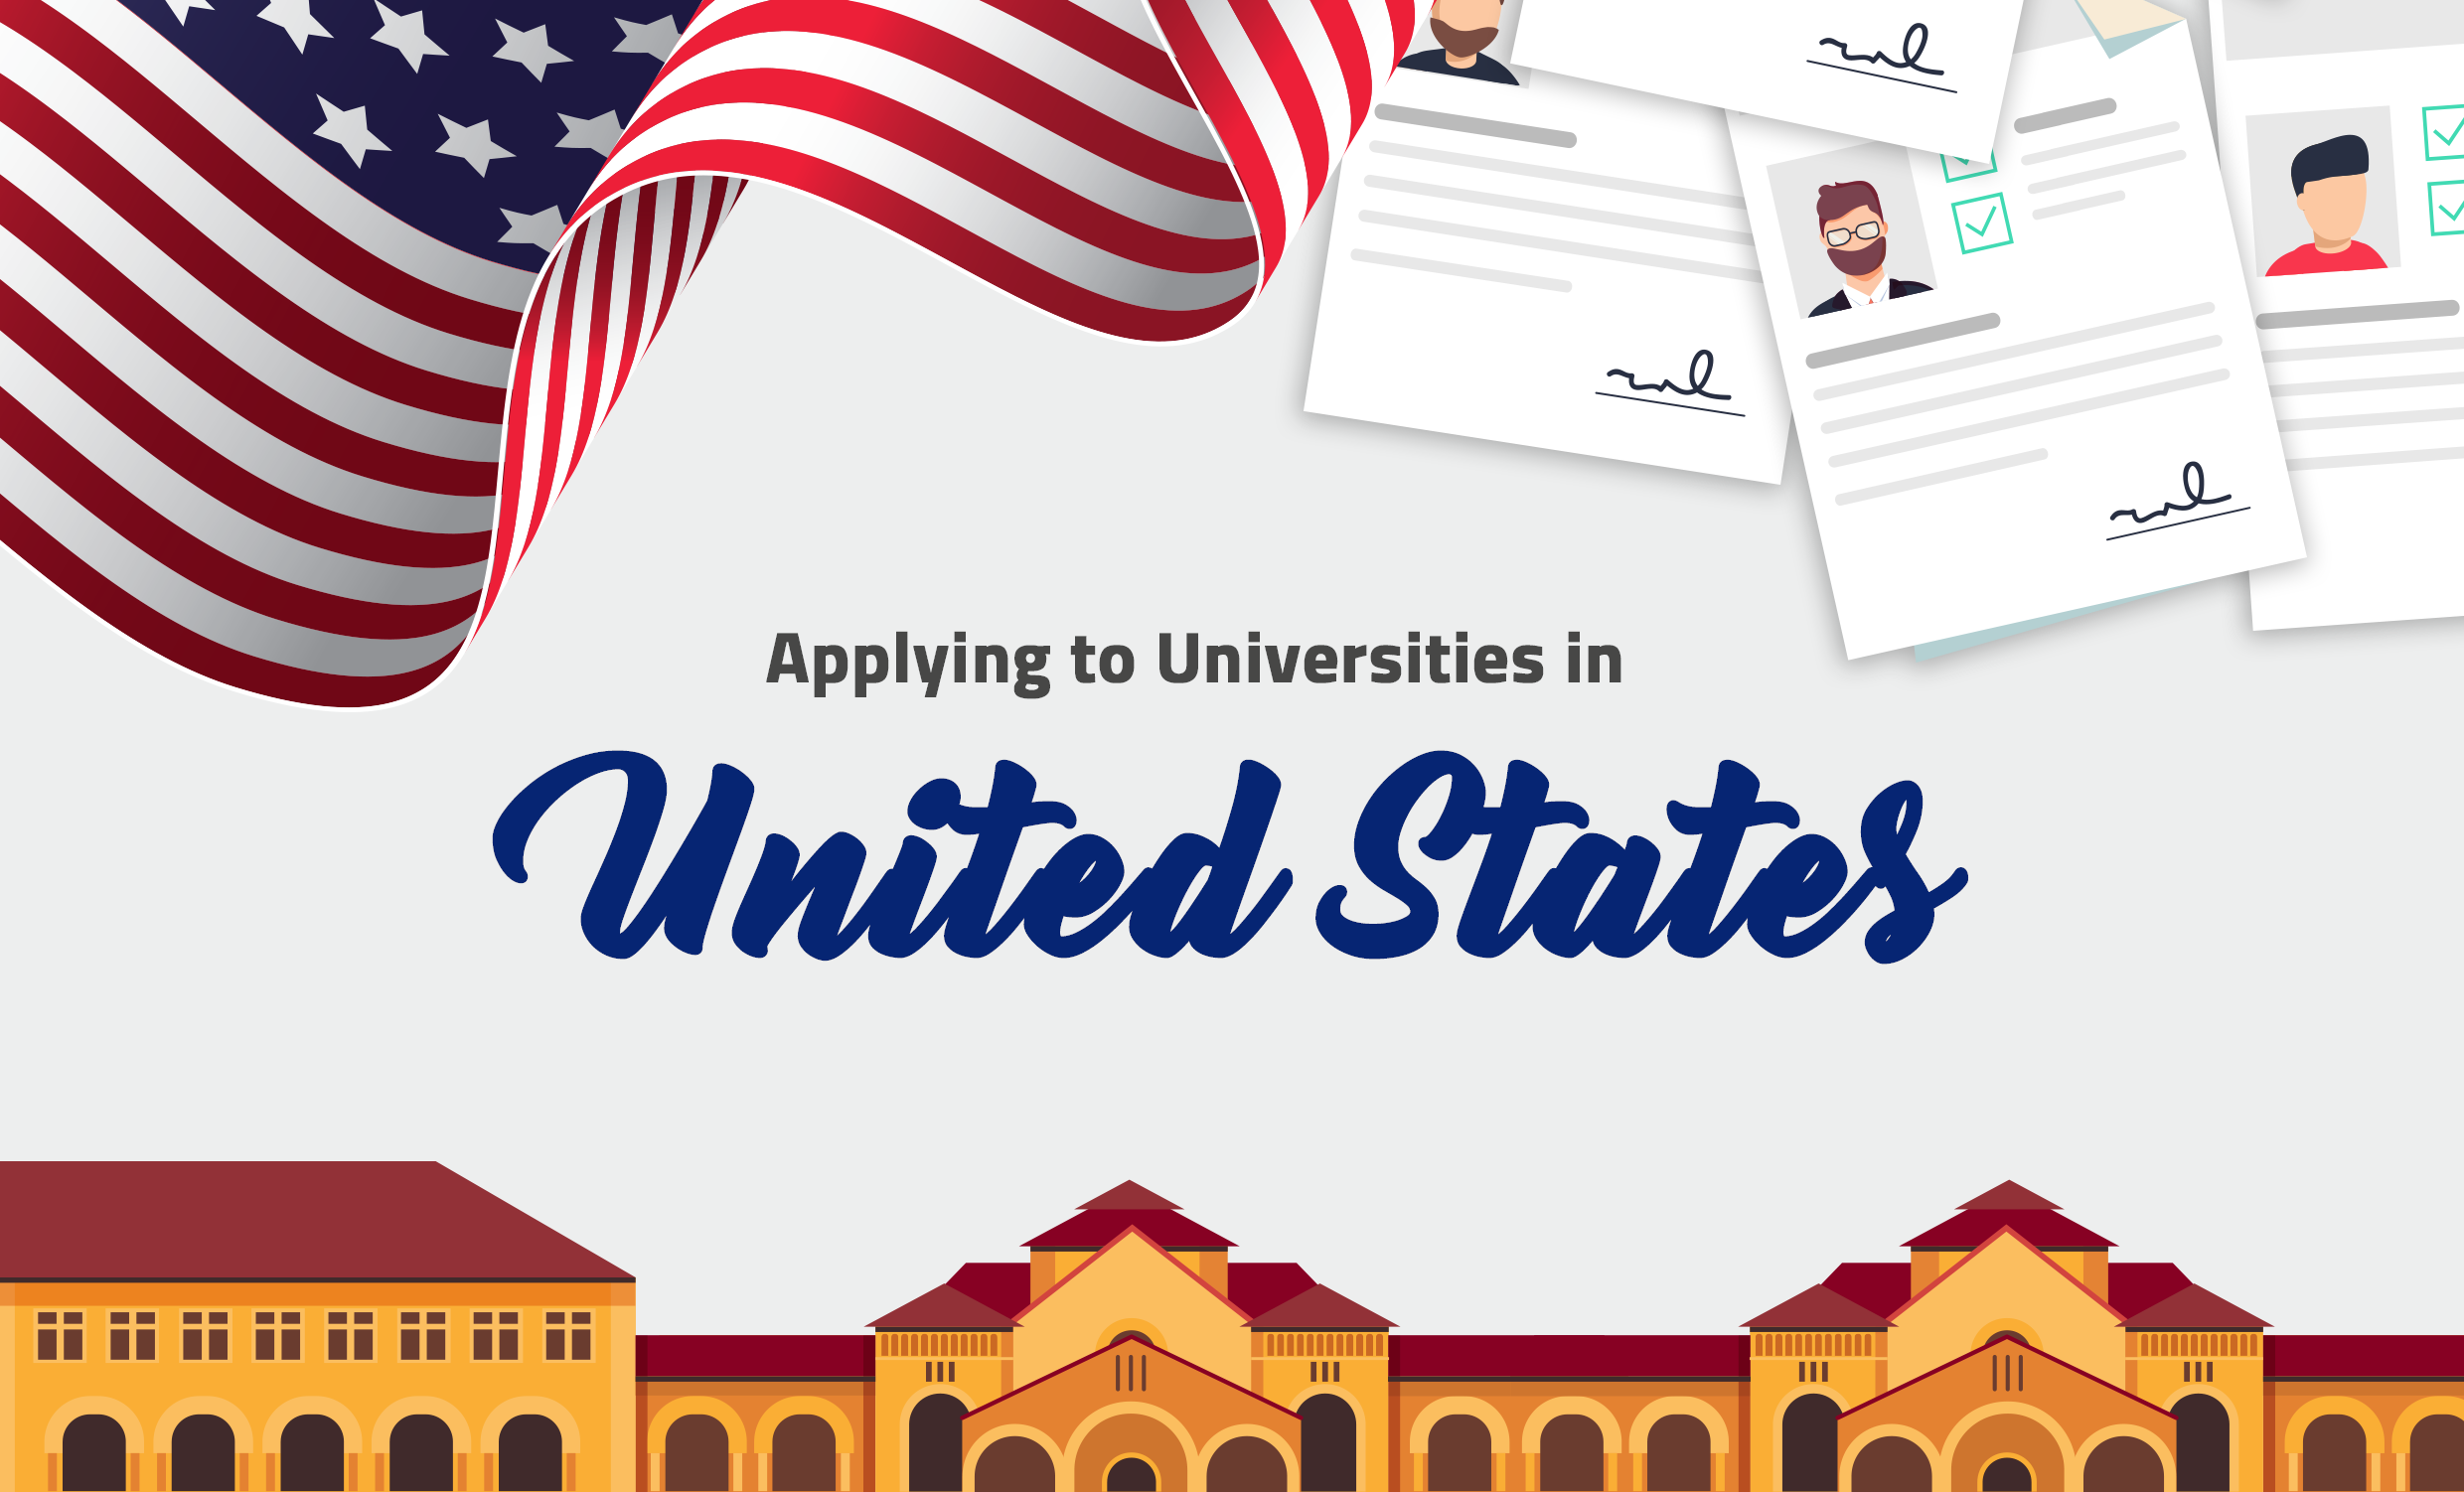 Applying to Universities in United States